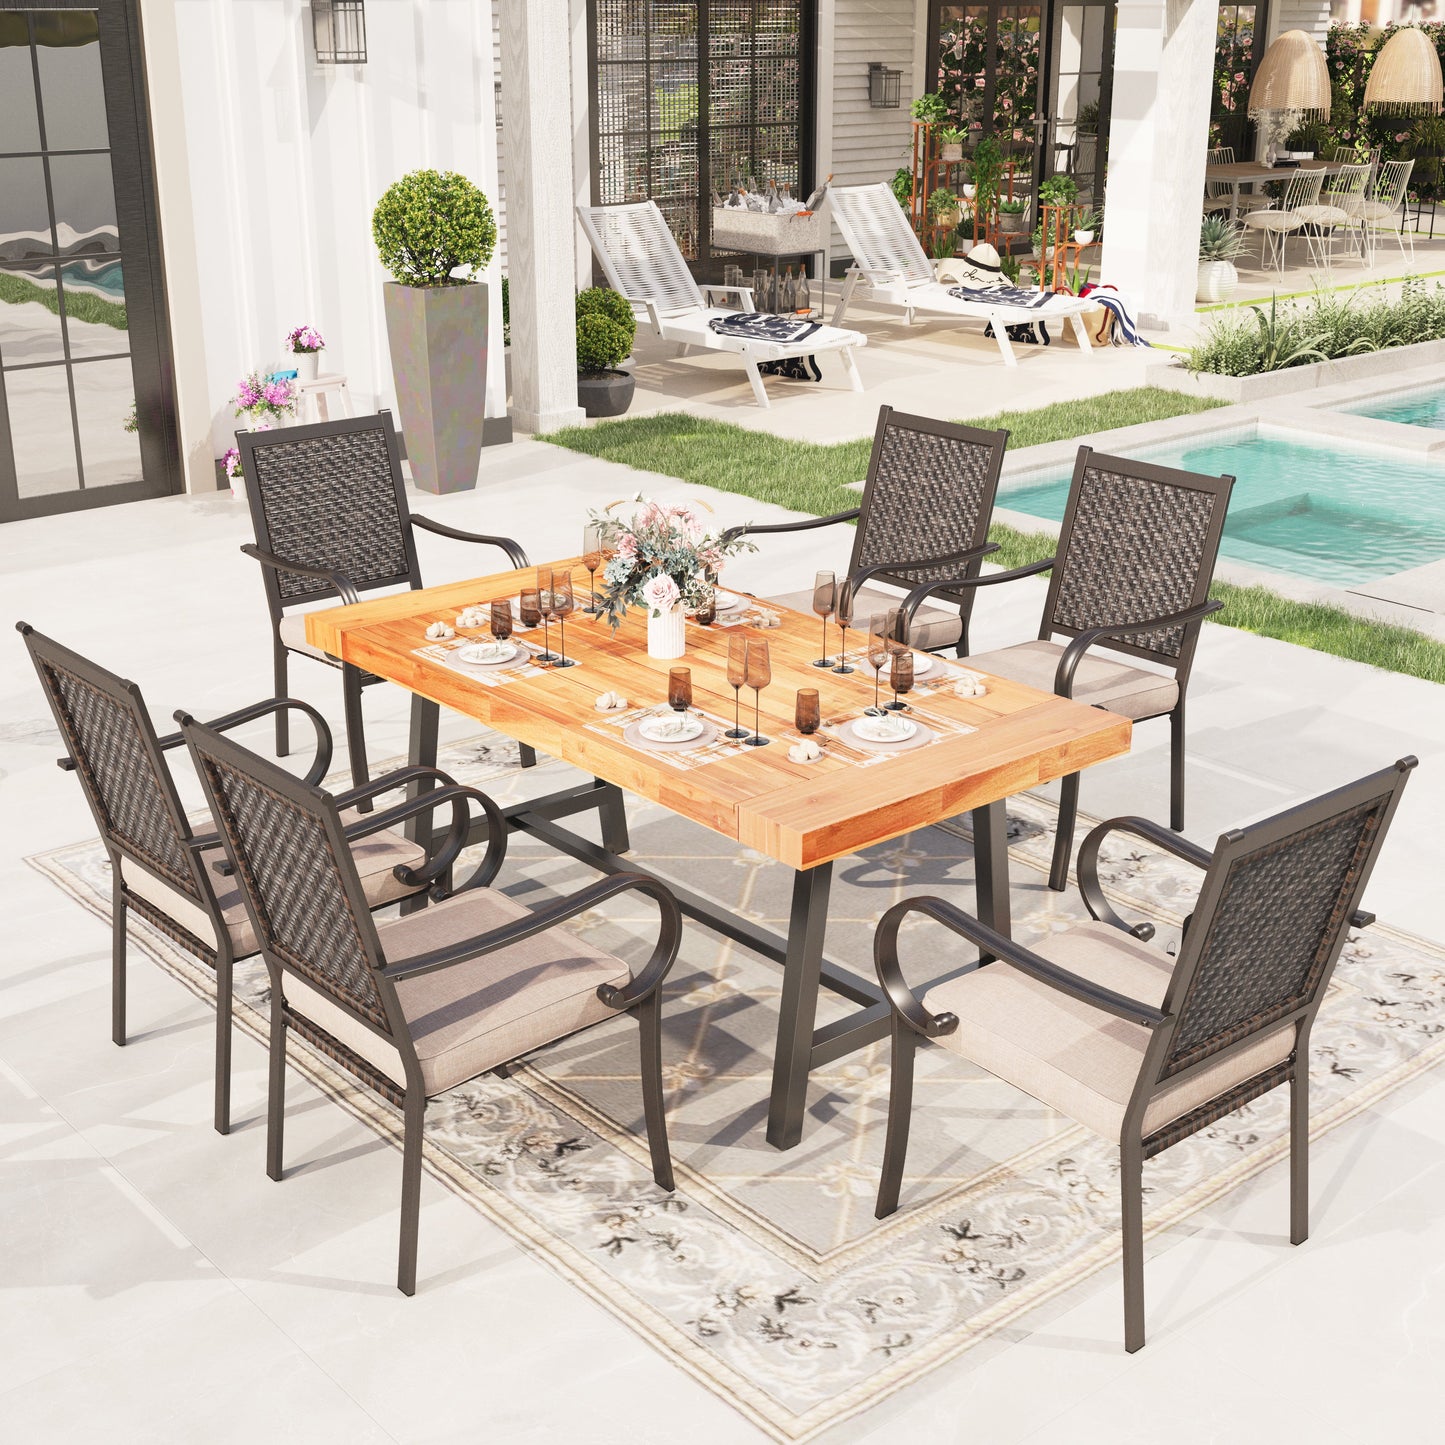 Sophia & William 7 Pieces Outdoor Patio Dining Set Wicker Rattan Chairs and Wood Table for 6 person